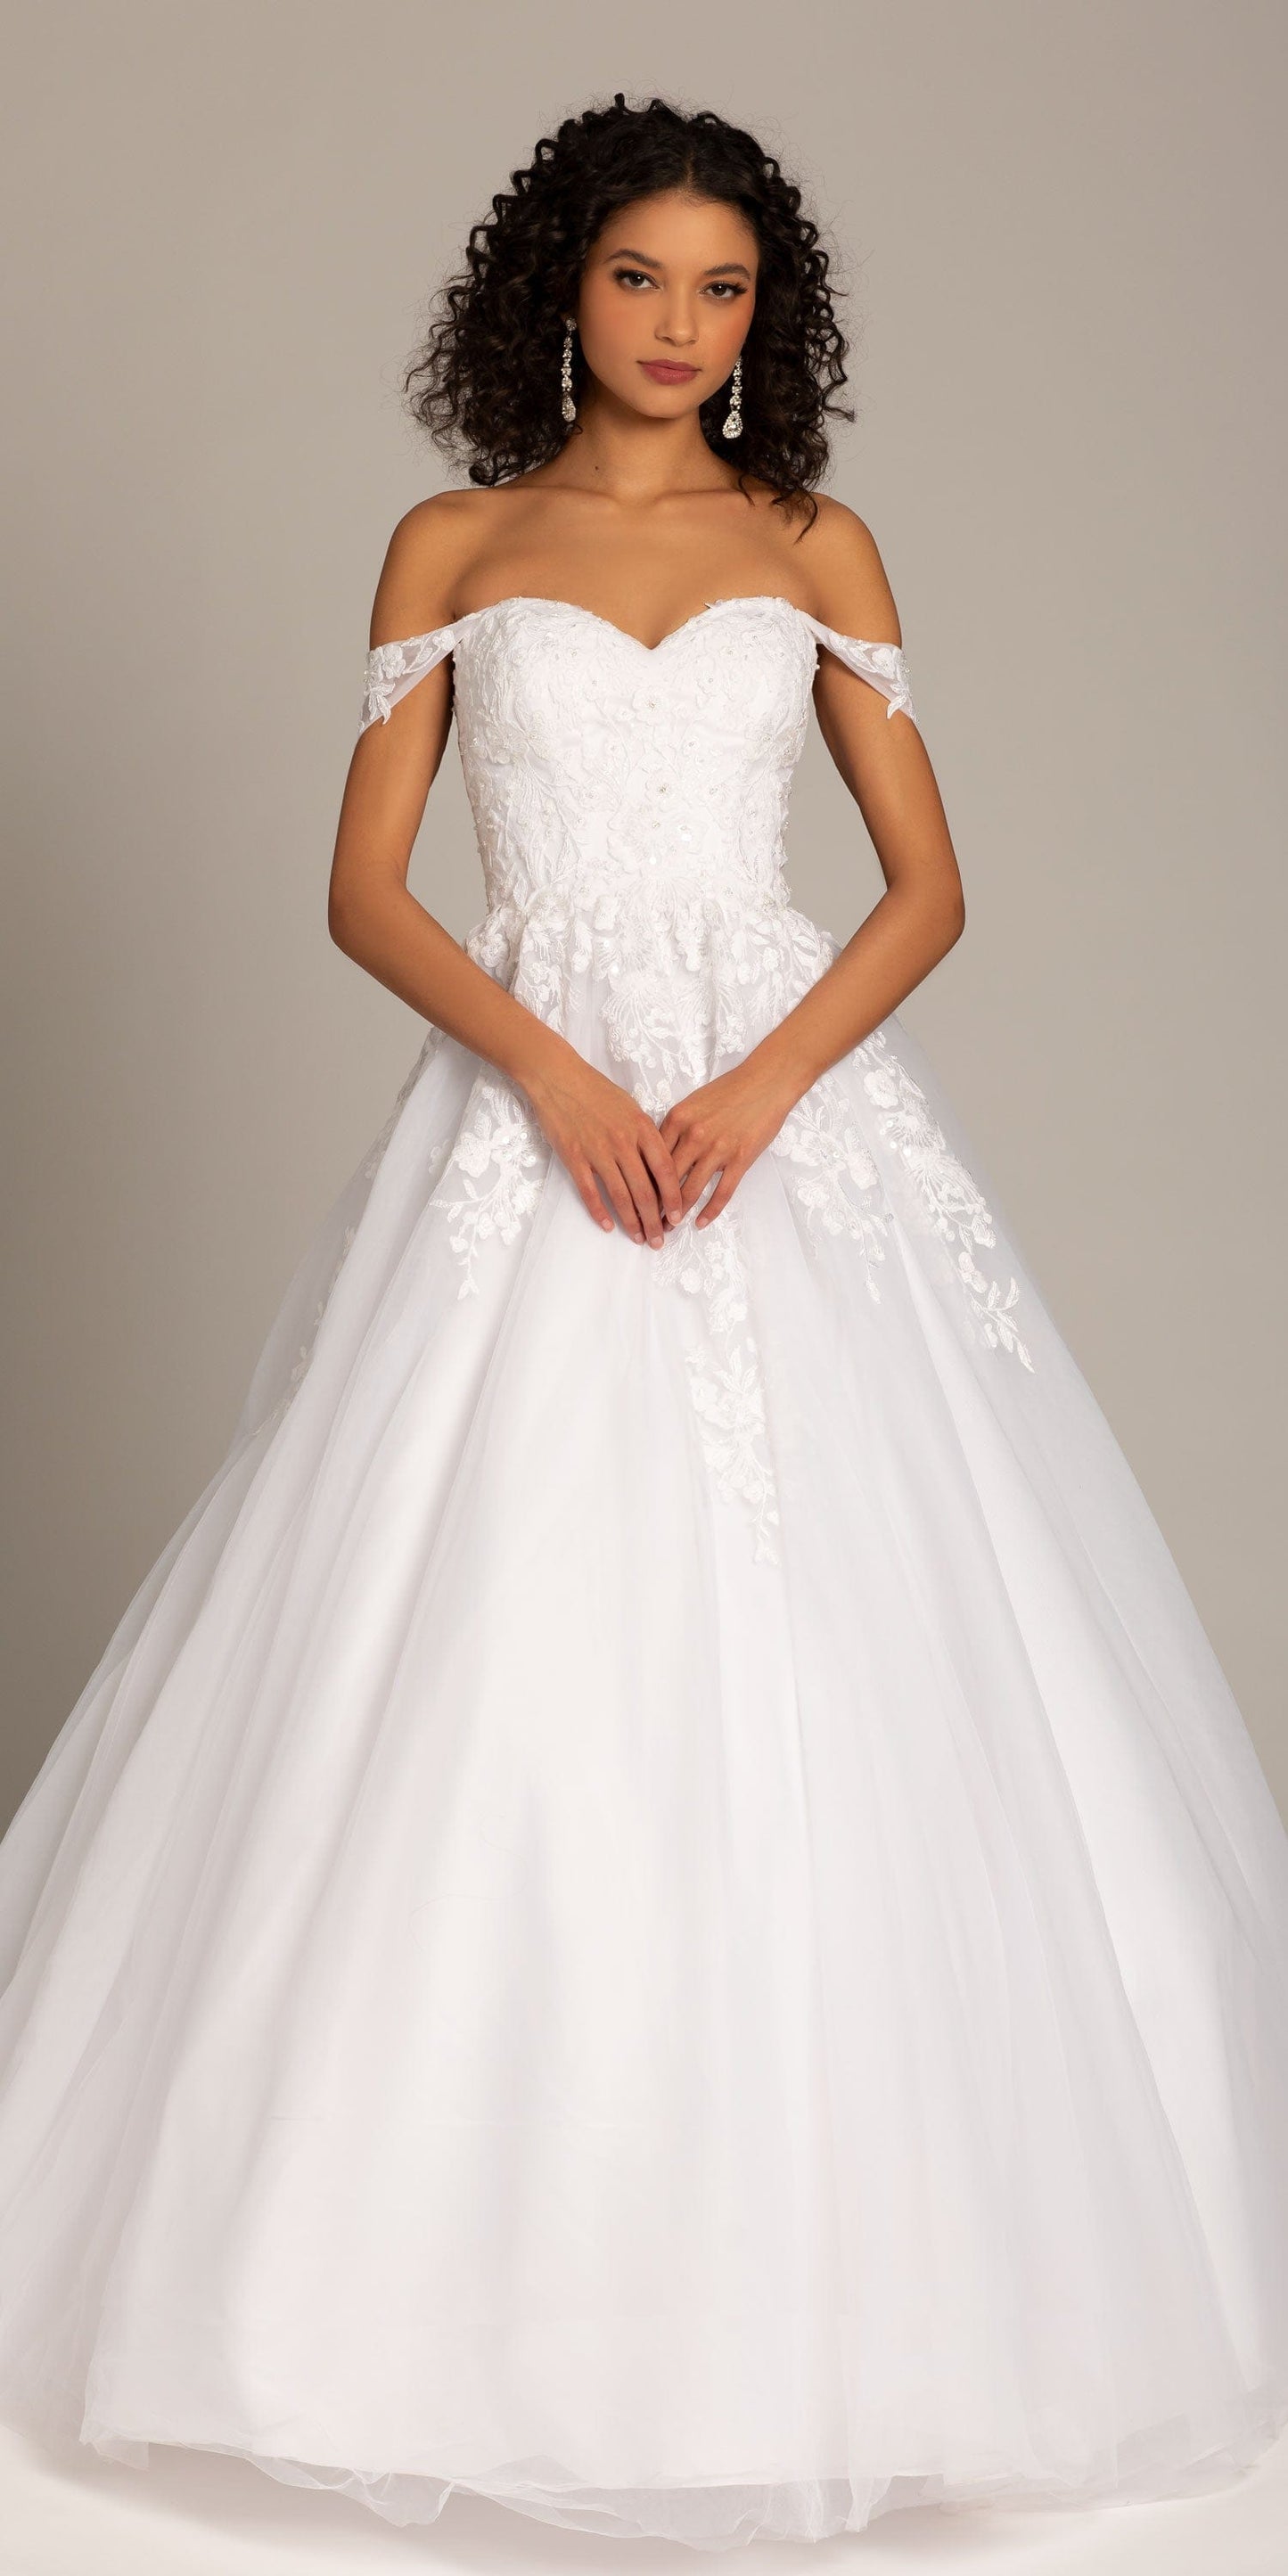 Camille La Vie Embroidered Off the Shoulder Tulle Ballgown with Floral Detail